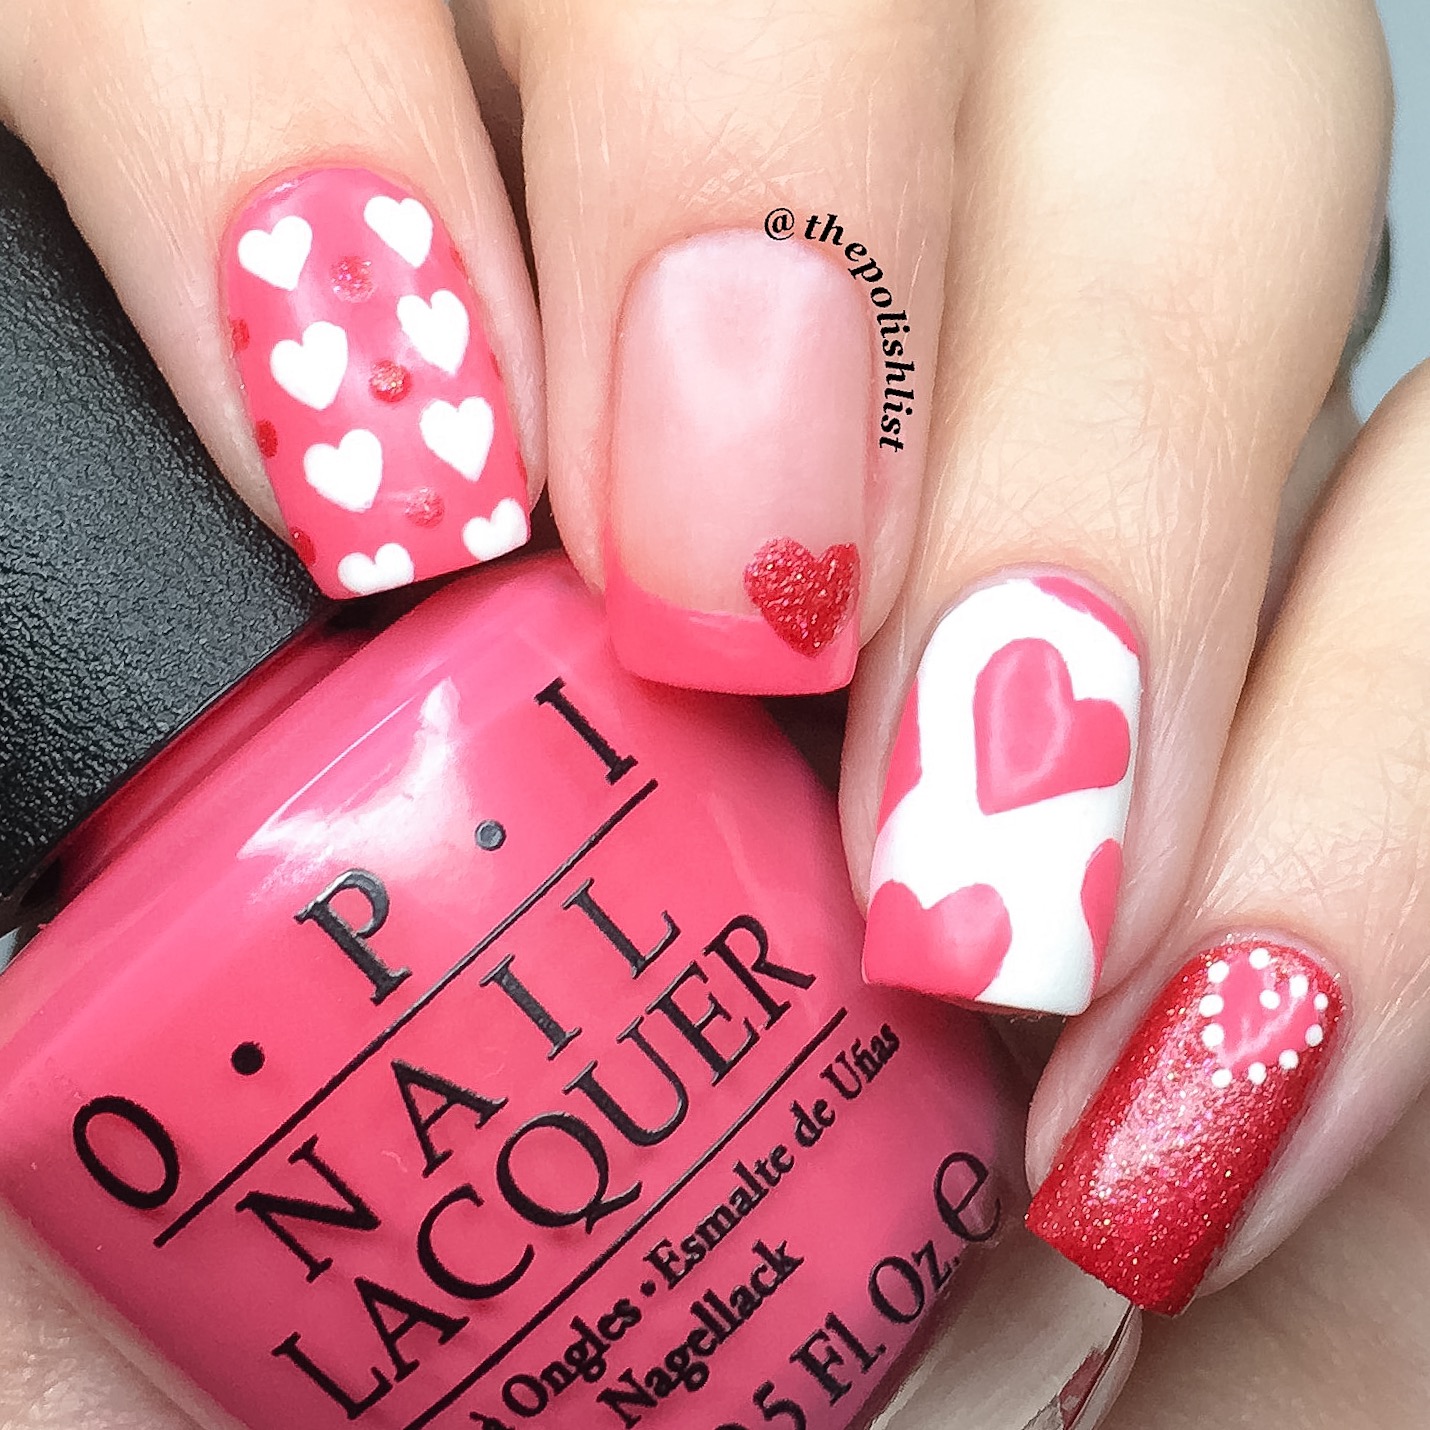 Pink, Hearts & OPI = Love. A simple valentines nail art design